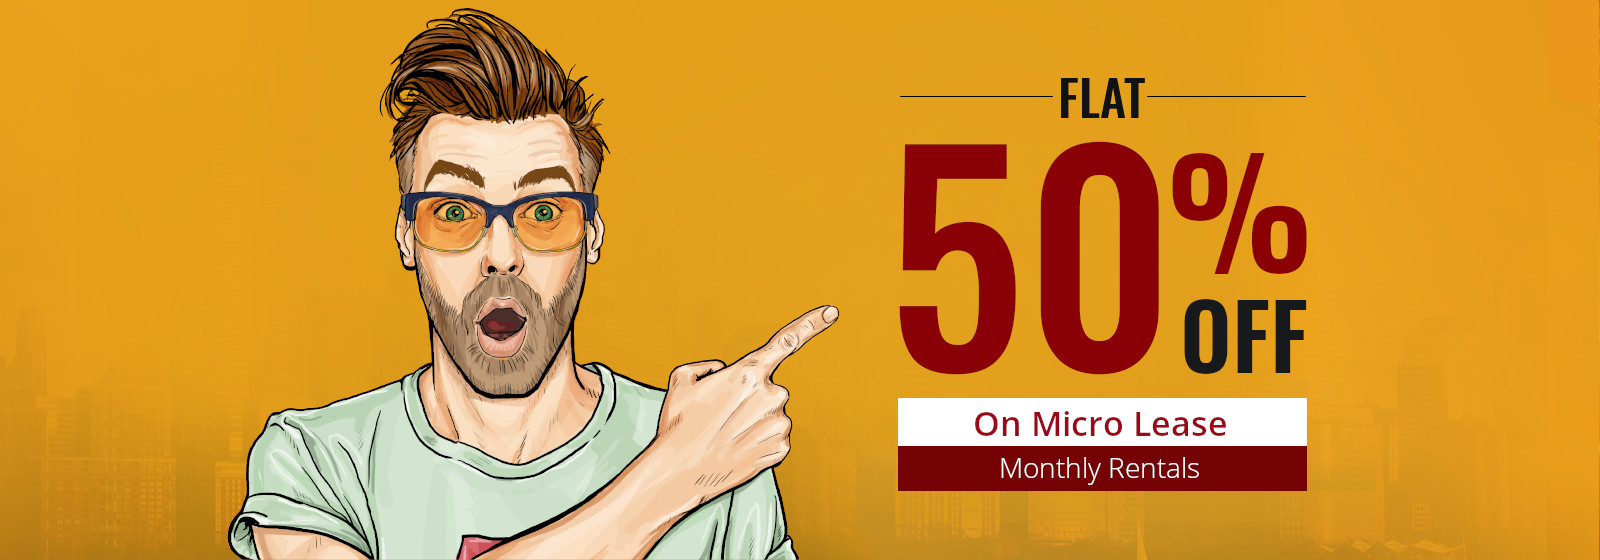 Flat 50% off On Micro Lease Monthly Rentals